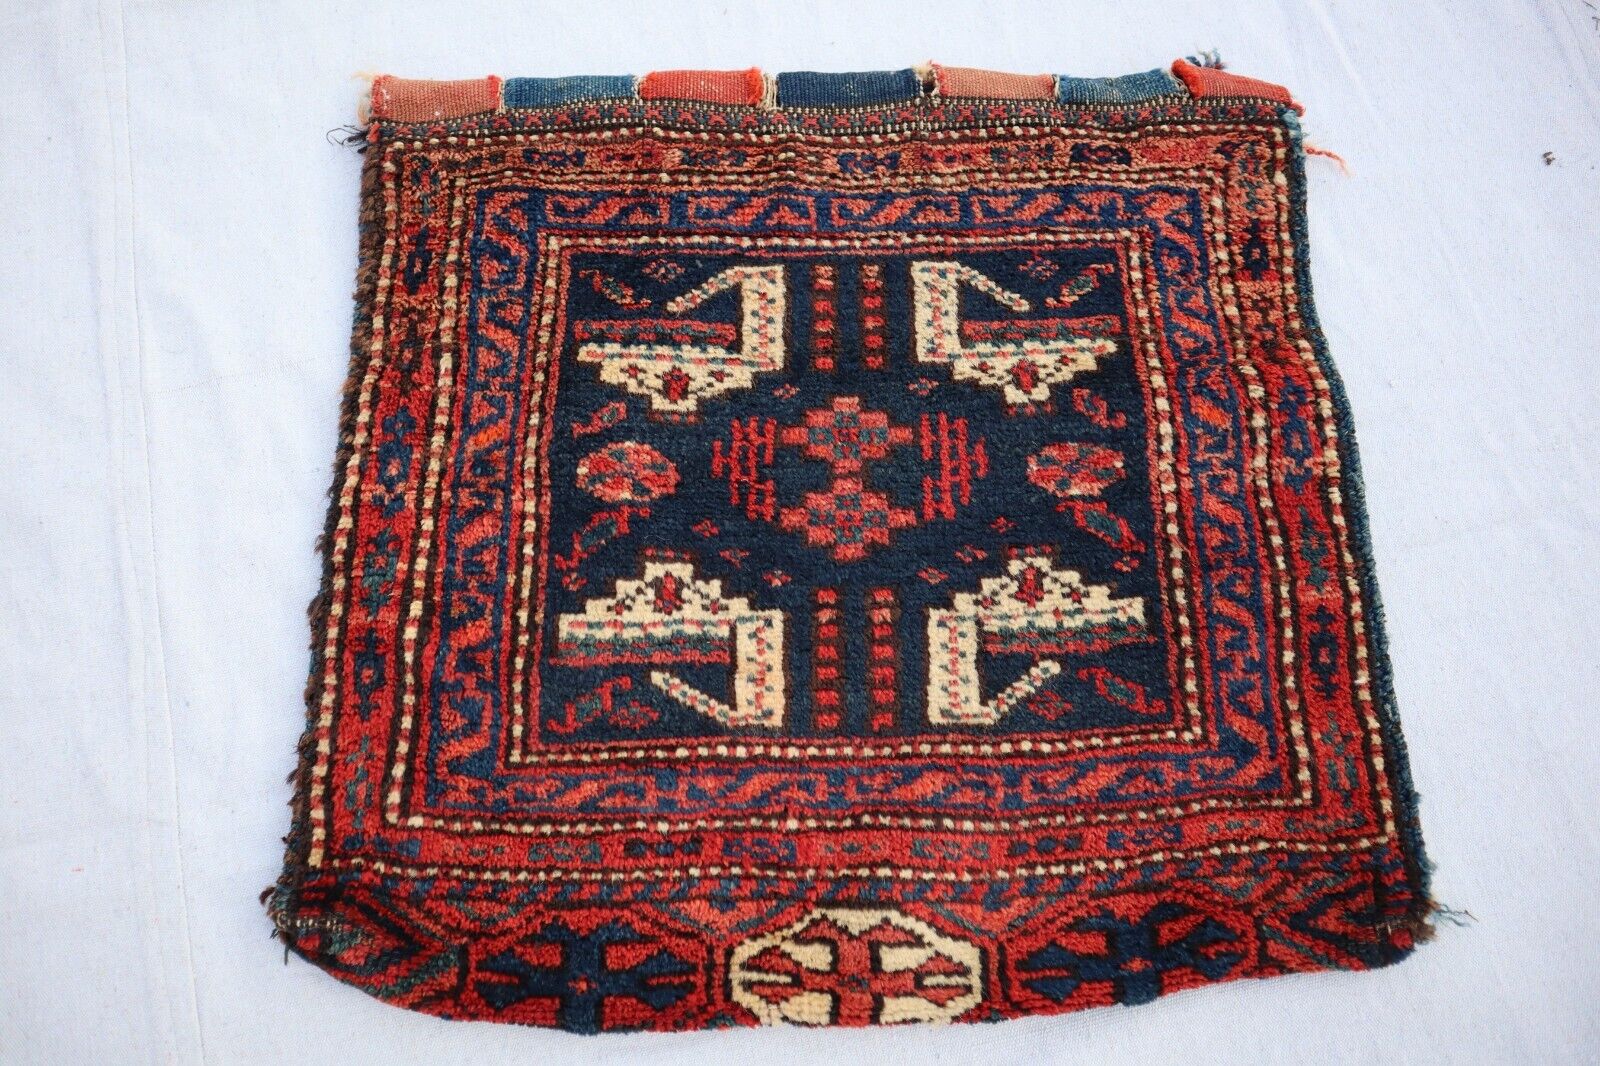 Antique gorgeous handmade Pillow rug, any room decoration rug.   Details below